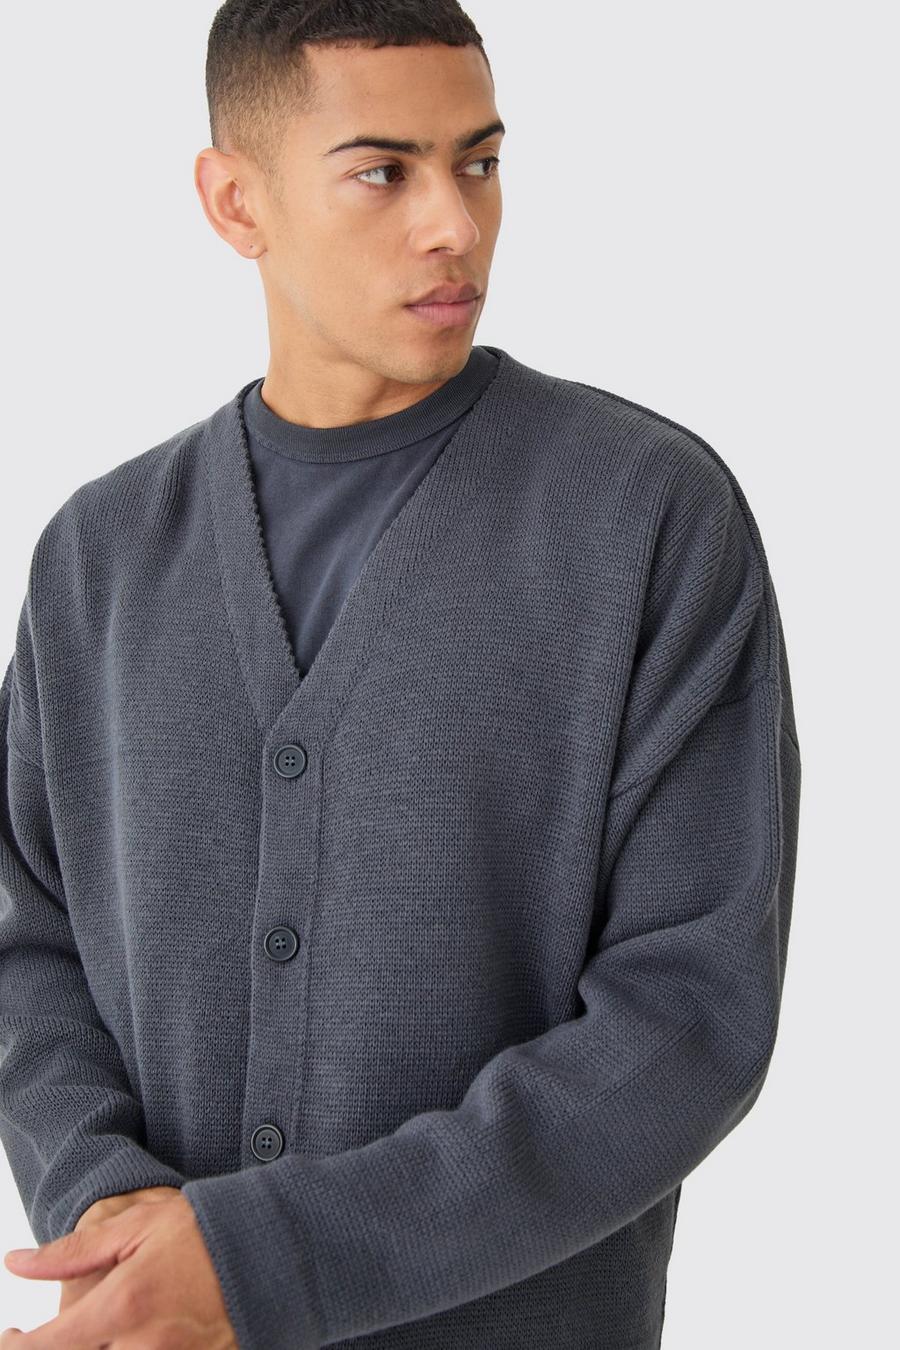 Charcoal Boxy Drop Shoulder Knitted Cardigan